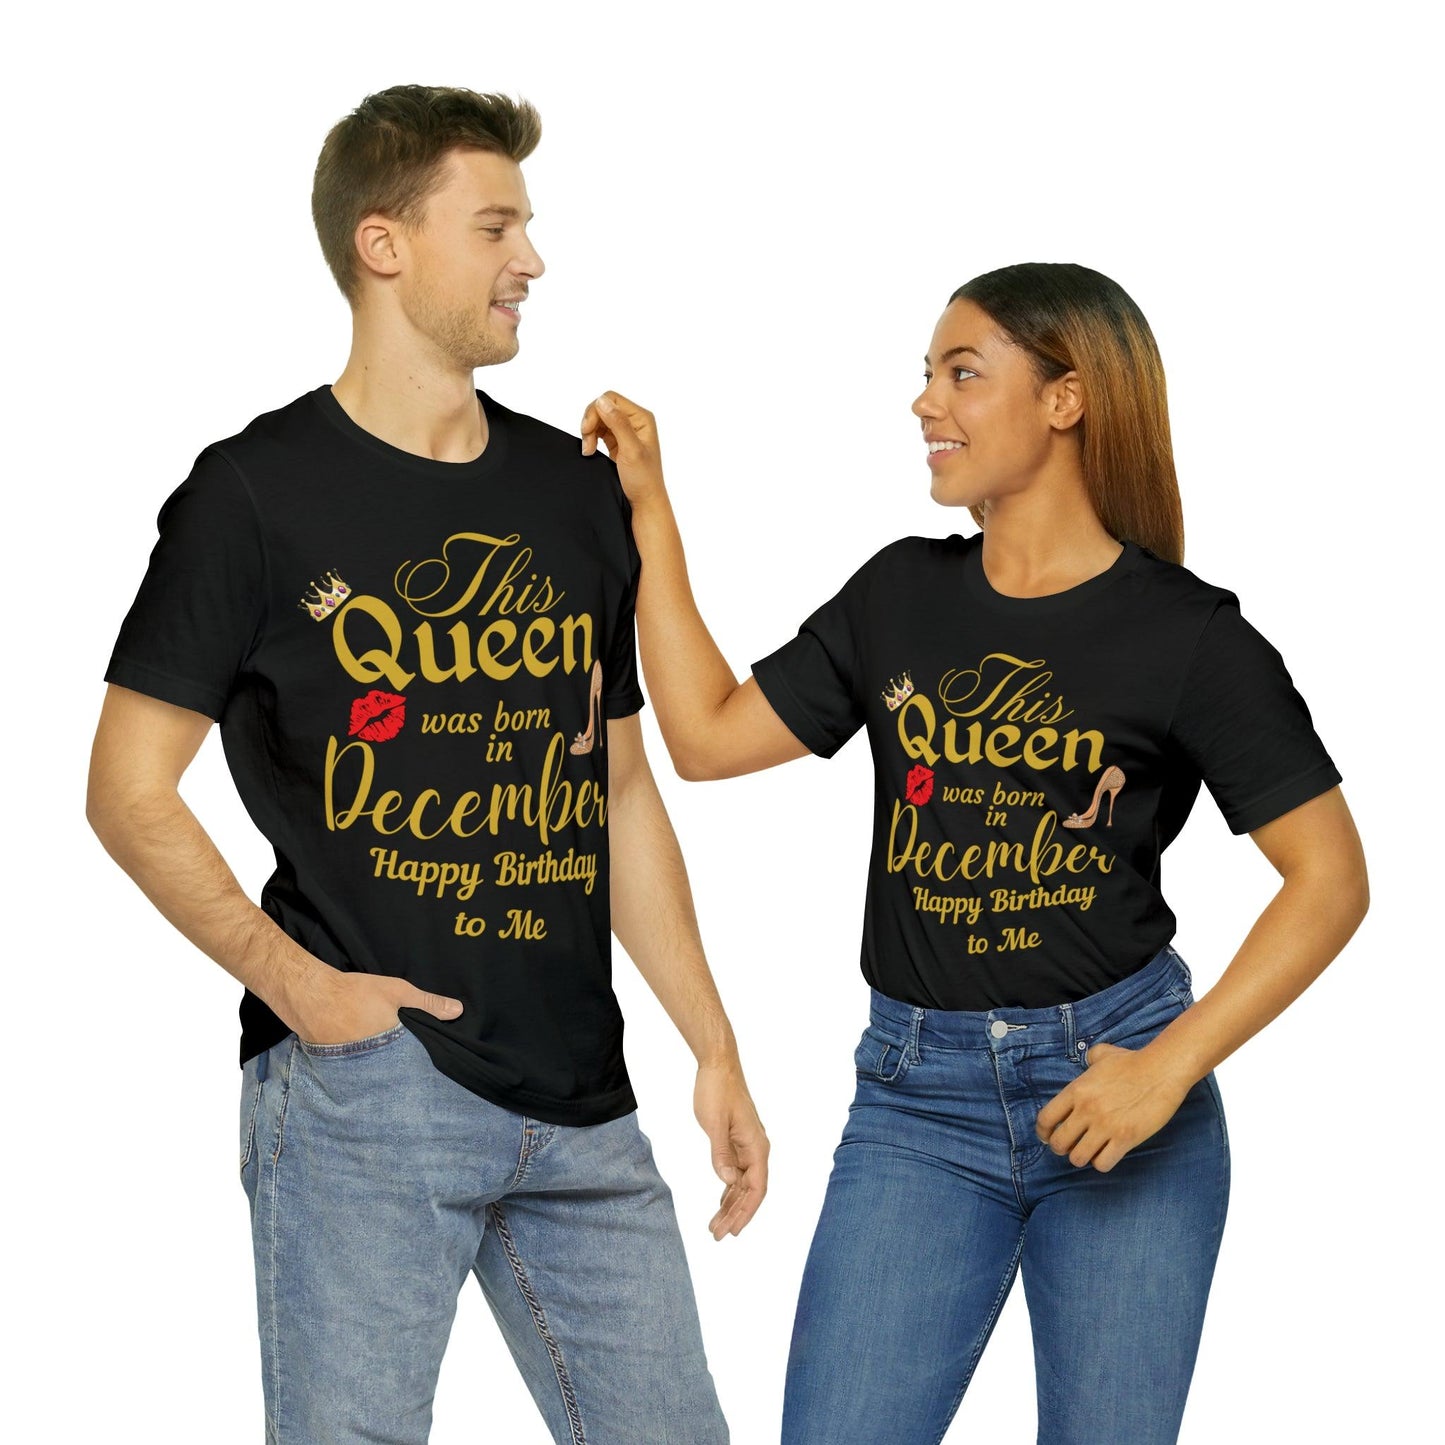 Birthday Queen Shirt, Gift for Birthday, This Queen was born in December Shirt, Funny Queen Shirt, Funny Birthday Shirt, Birthday Gift - Giftsmojo